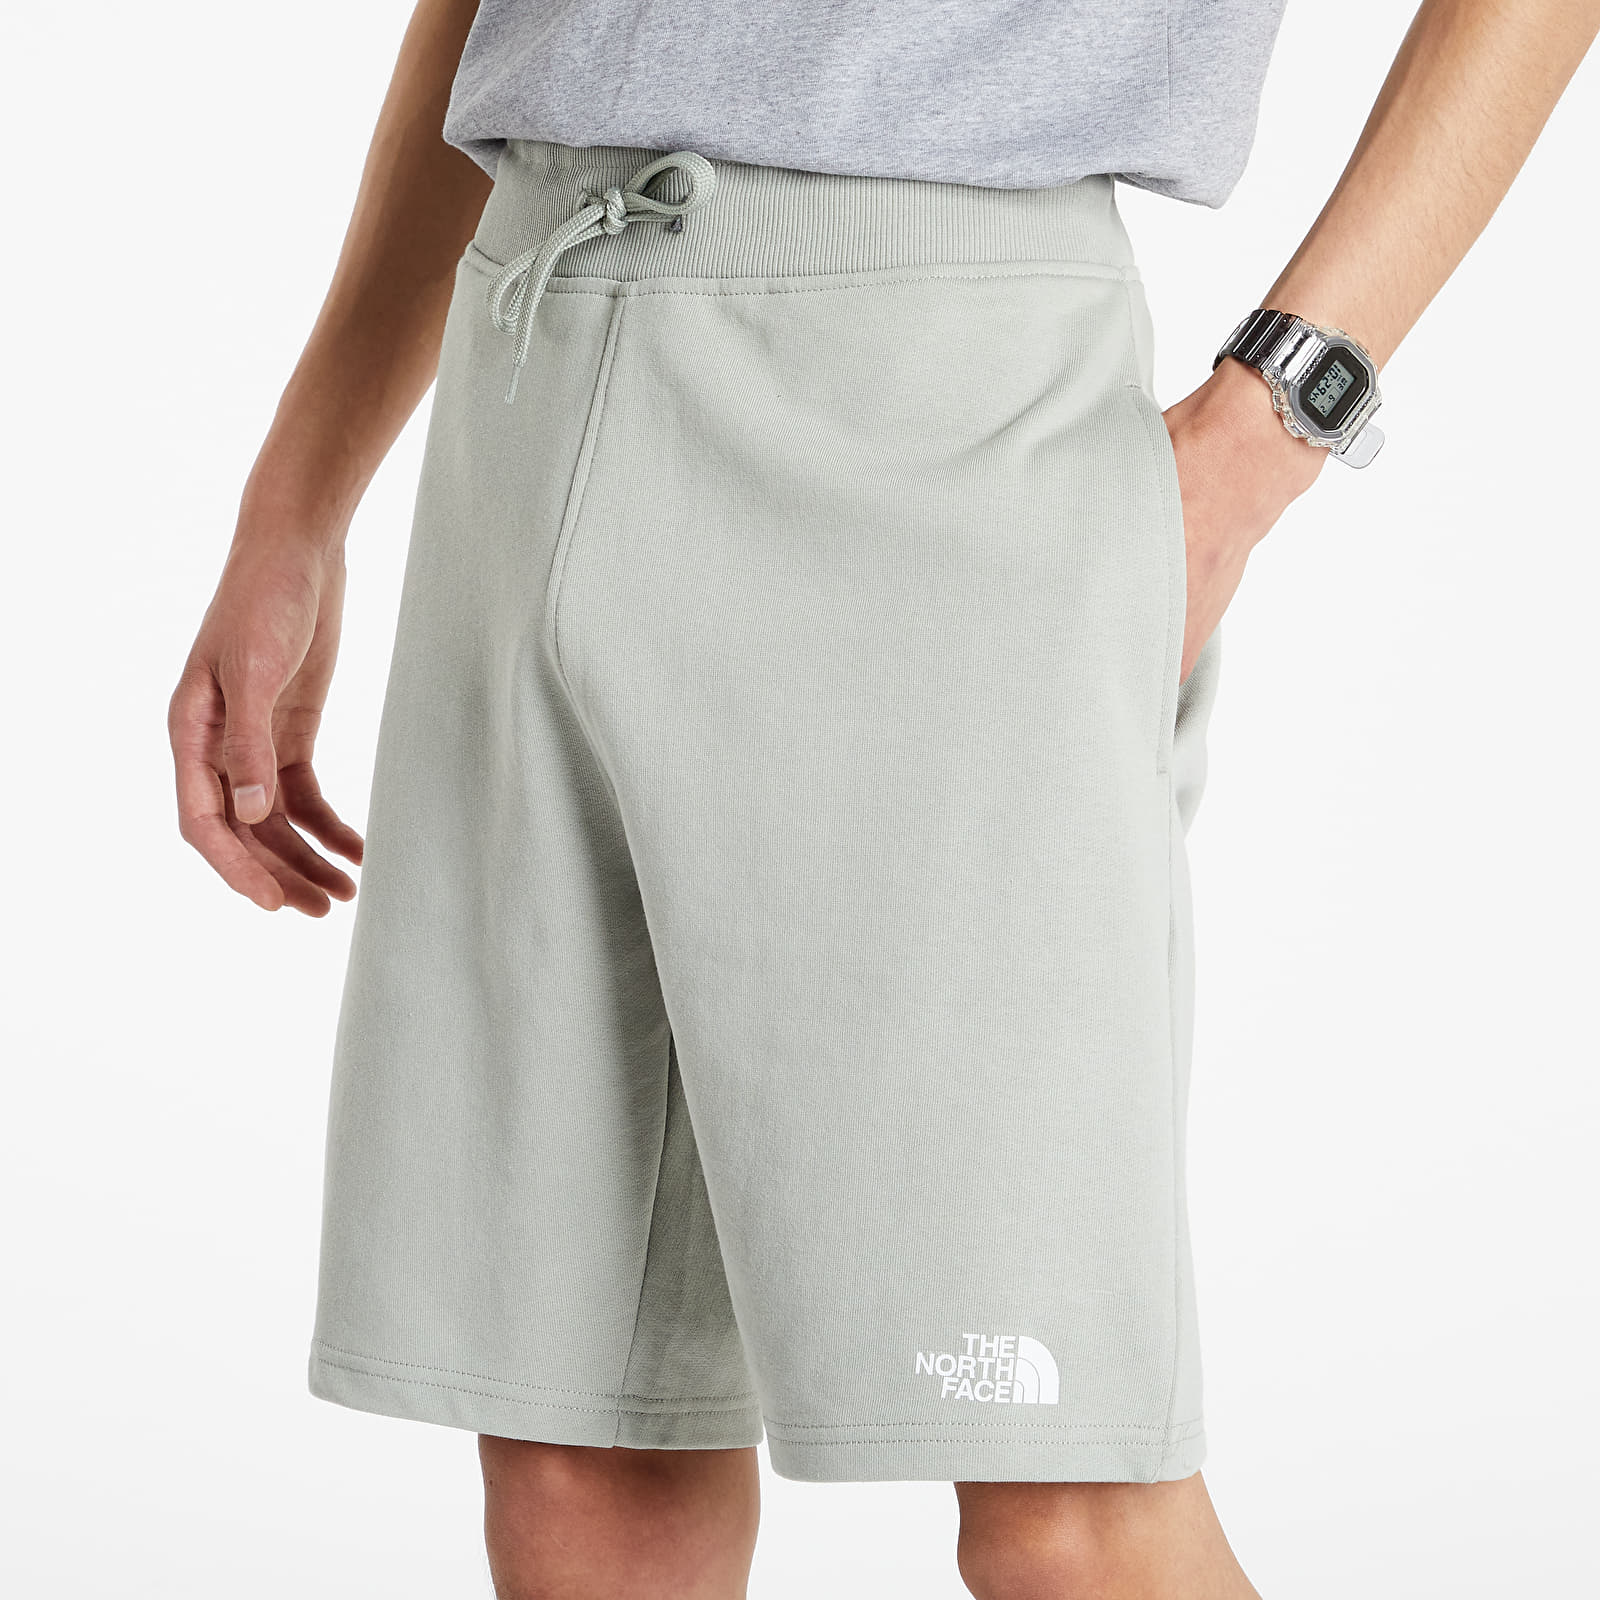 The north face standard shorts